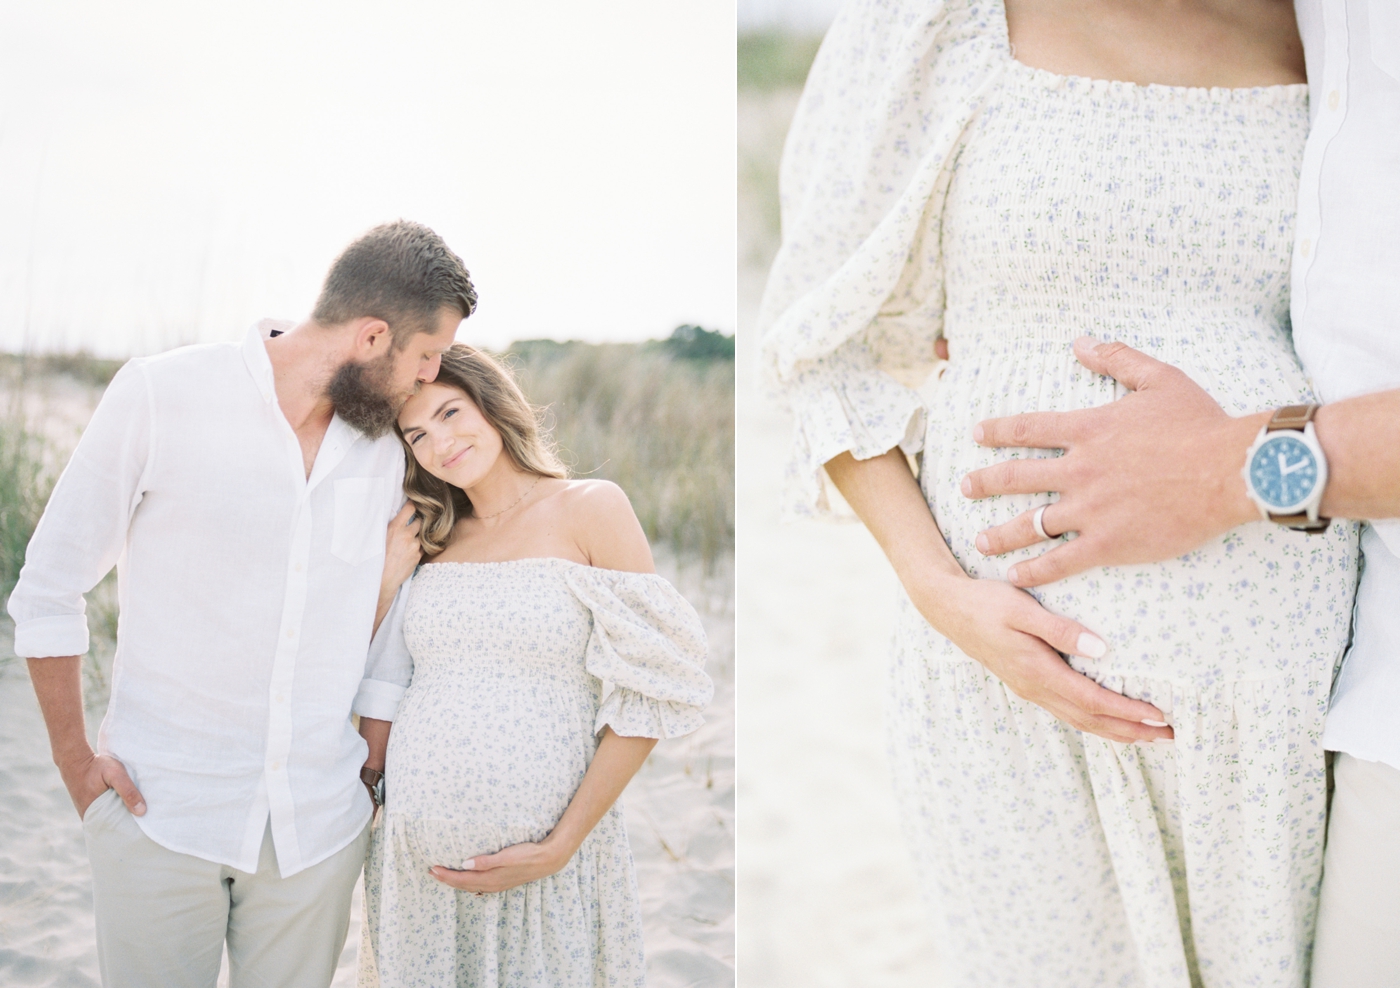 Mother and father to be on Sullivans Island | Photo by Caitlyn Motycka Photography.